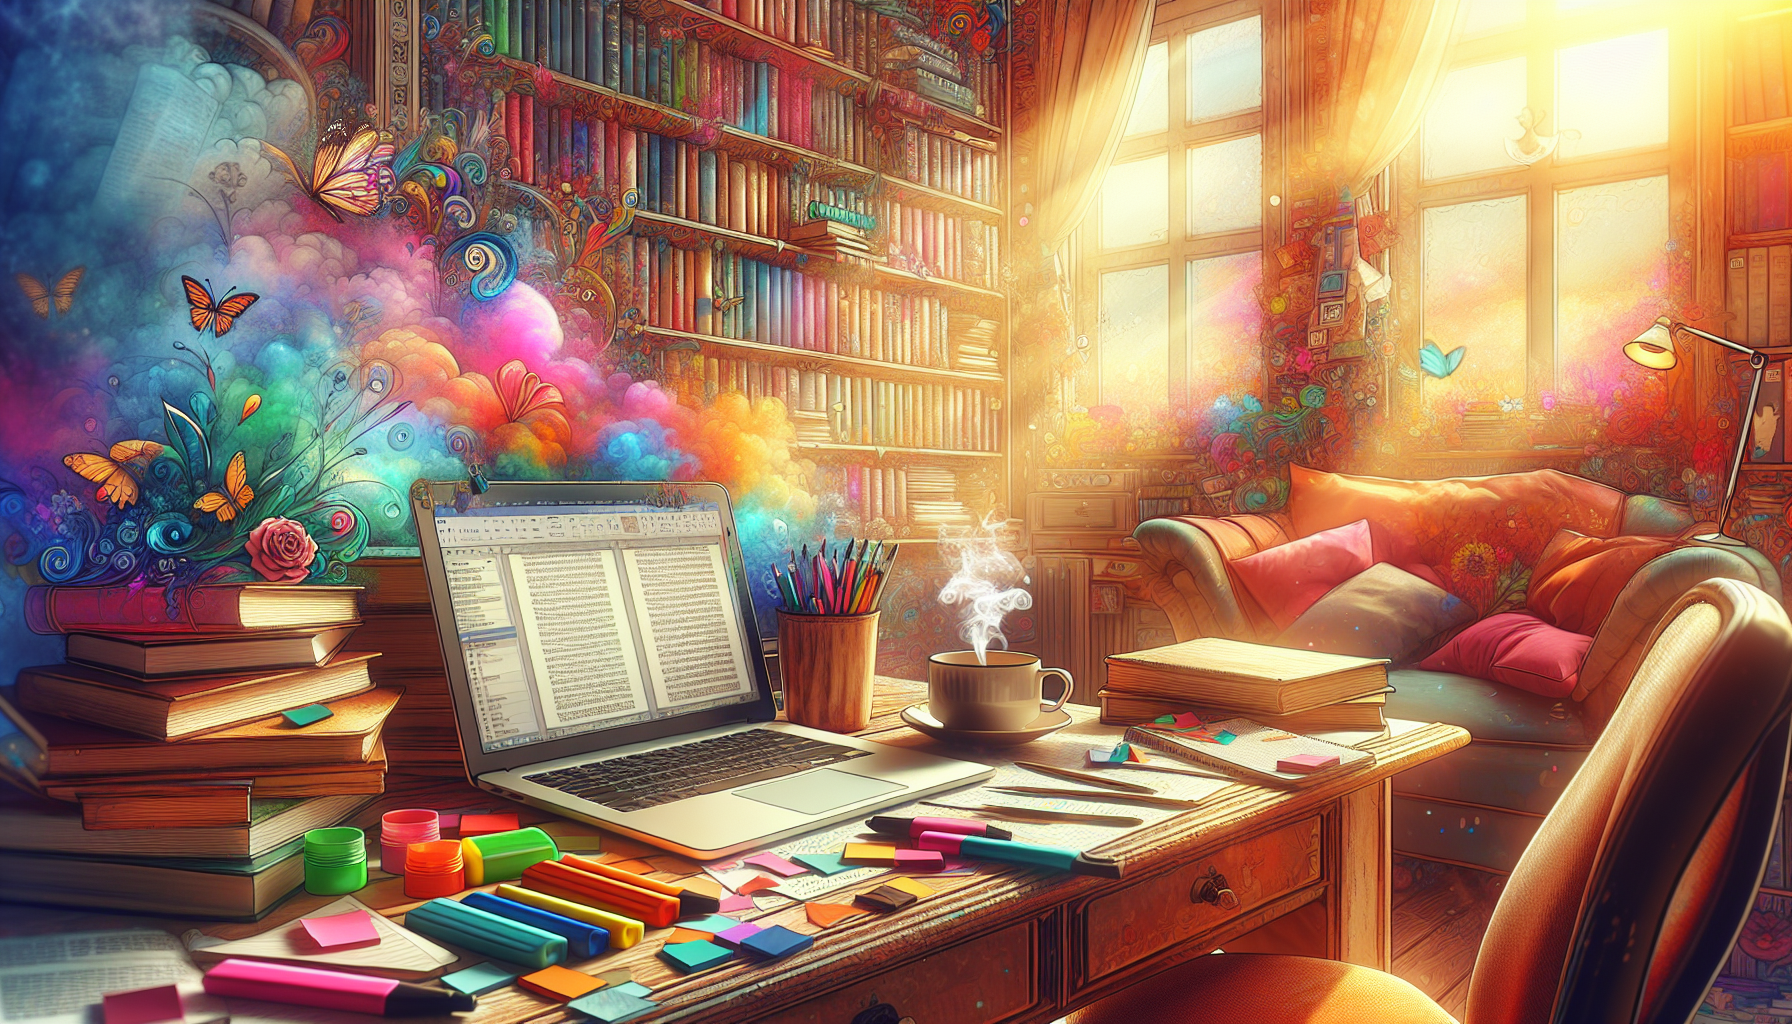 Create an image of a cozy, sunlit study with a vintage wooden desk. On the desk, an open laptop displays a step-by-step guide titled How to Craft Character Introductions (with Template), surrounded by